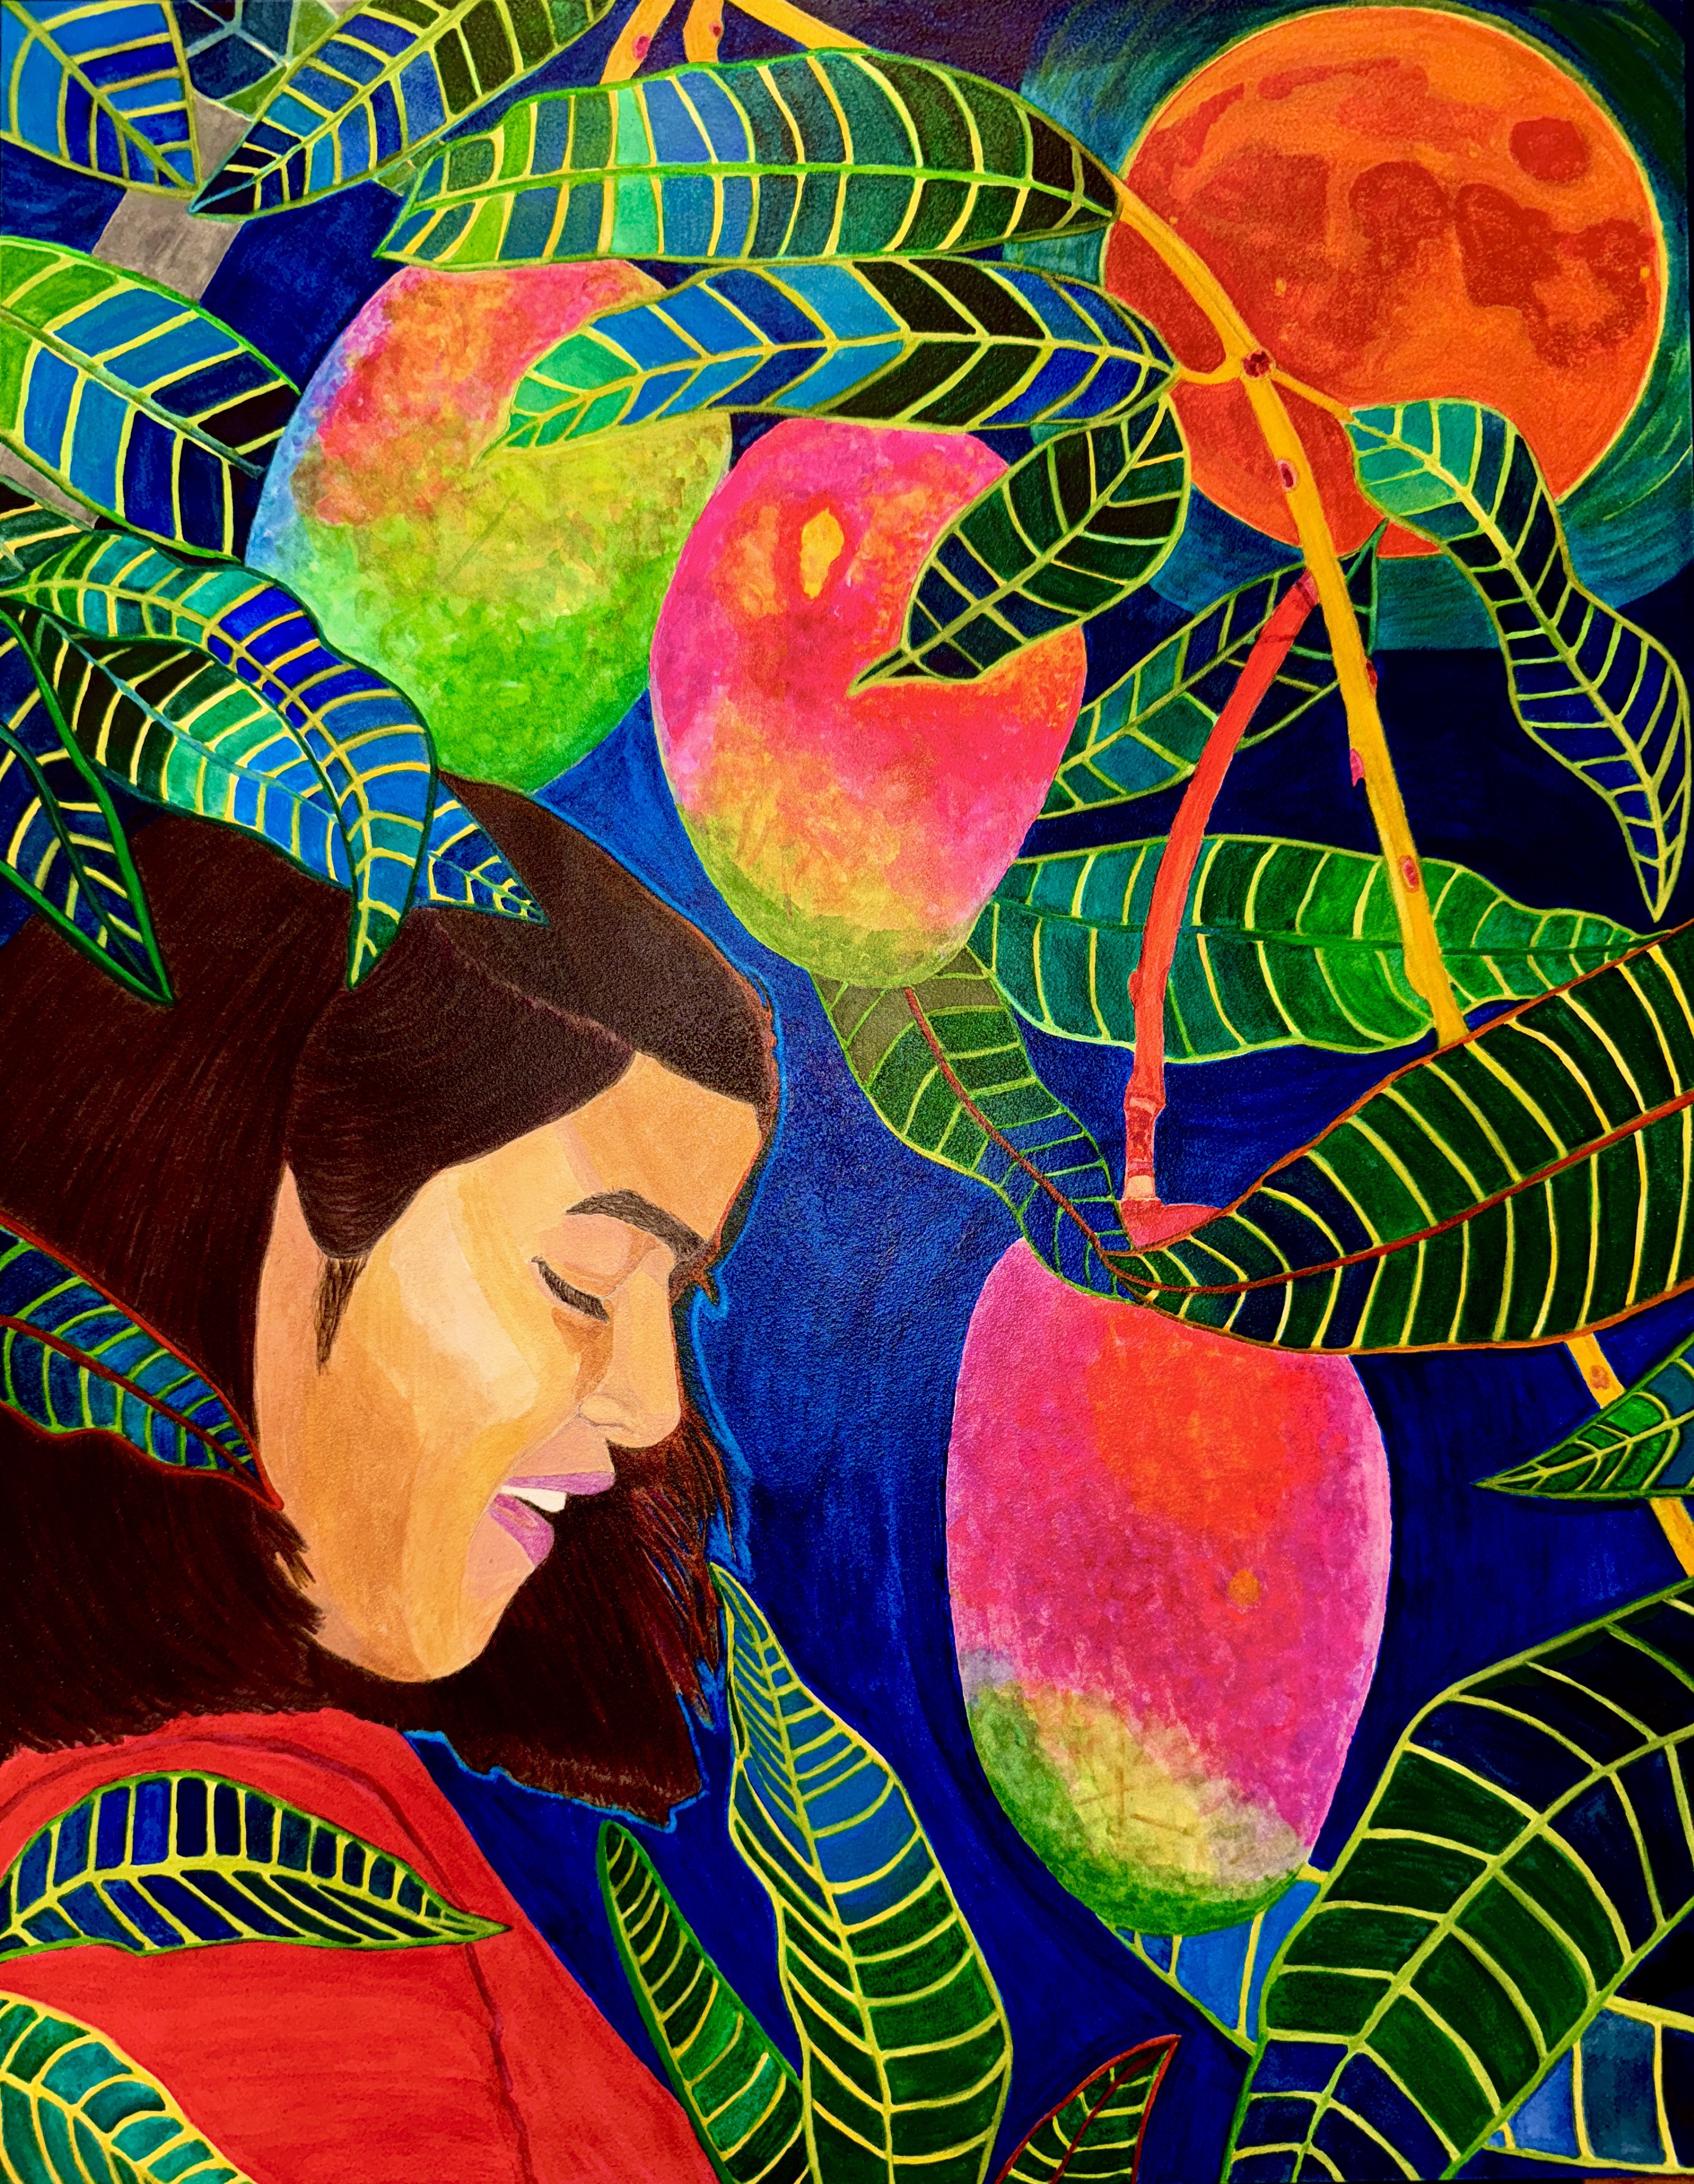 Watercolor painting of woman with brown hair and tan skin in a red top from the chest upward in corner looking down or eyes closed with green and yellow leaves, a red-orange orb like a sun, and green-pink-yellow orbs like fruit hanging around the person